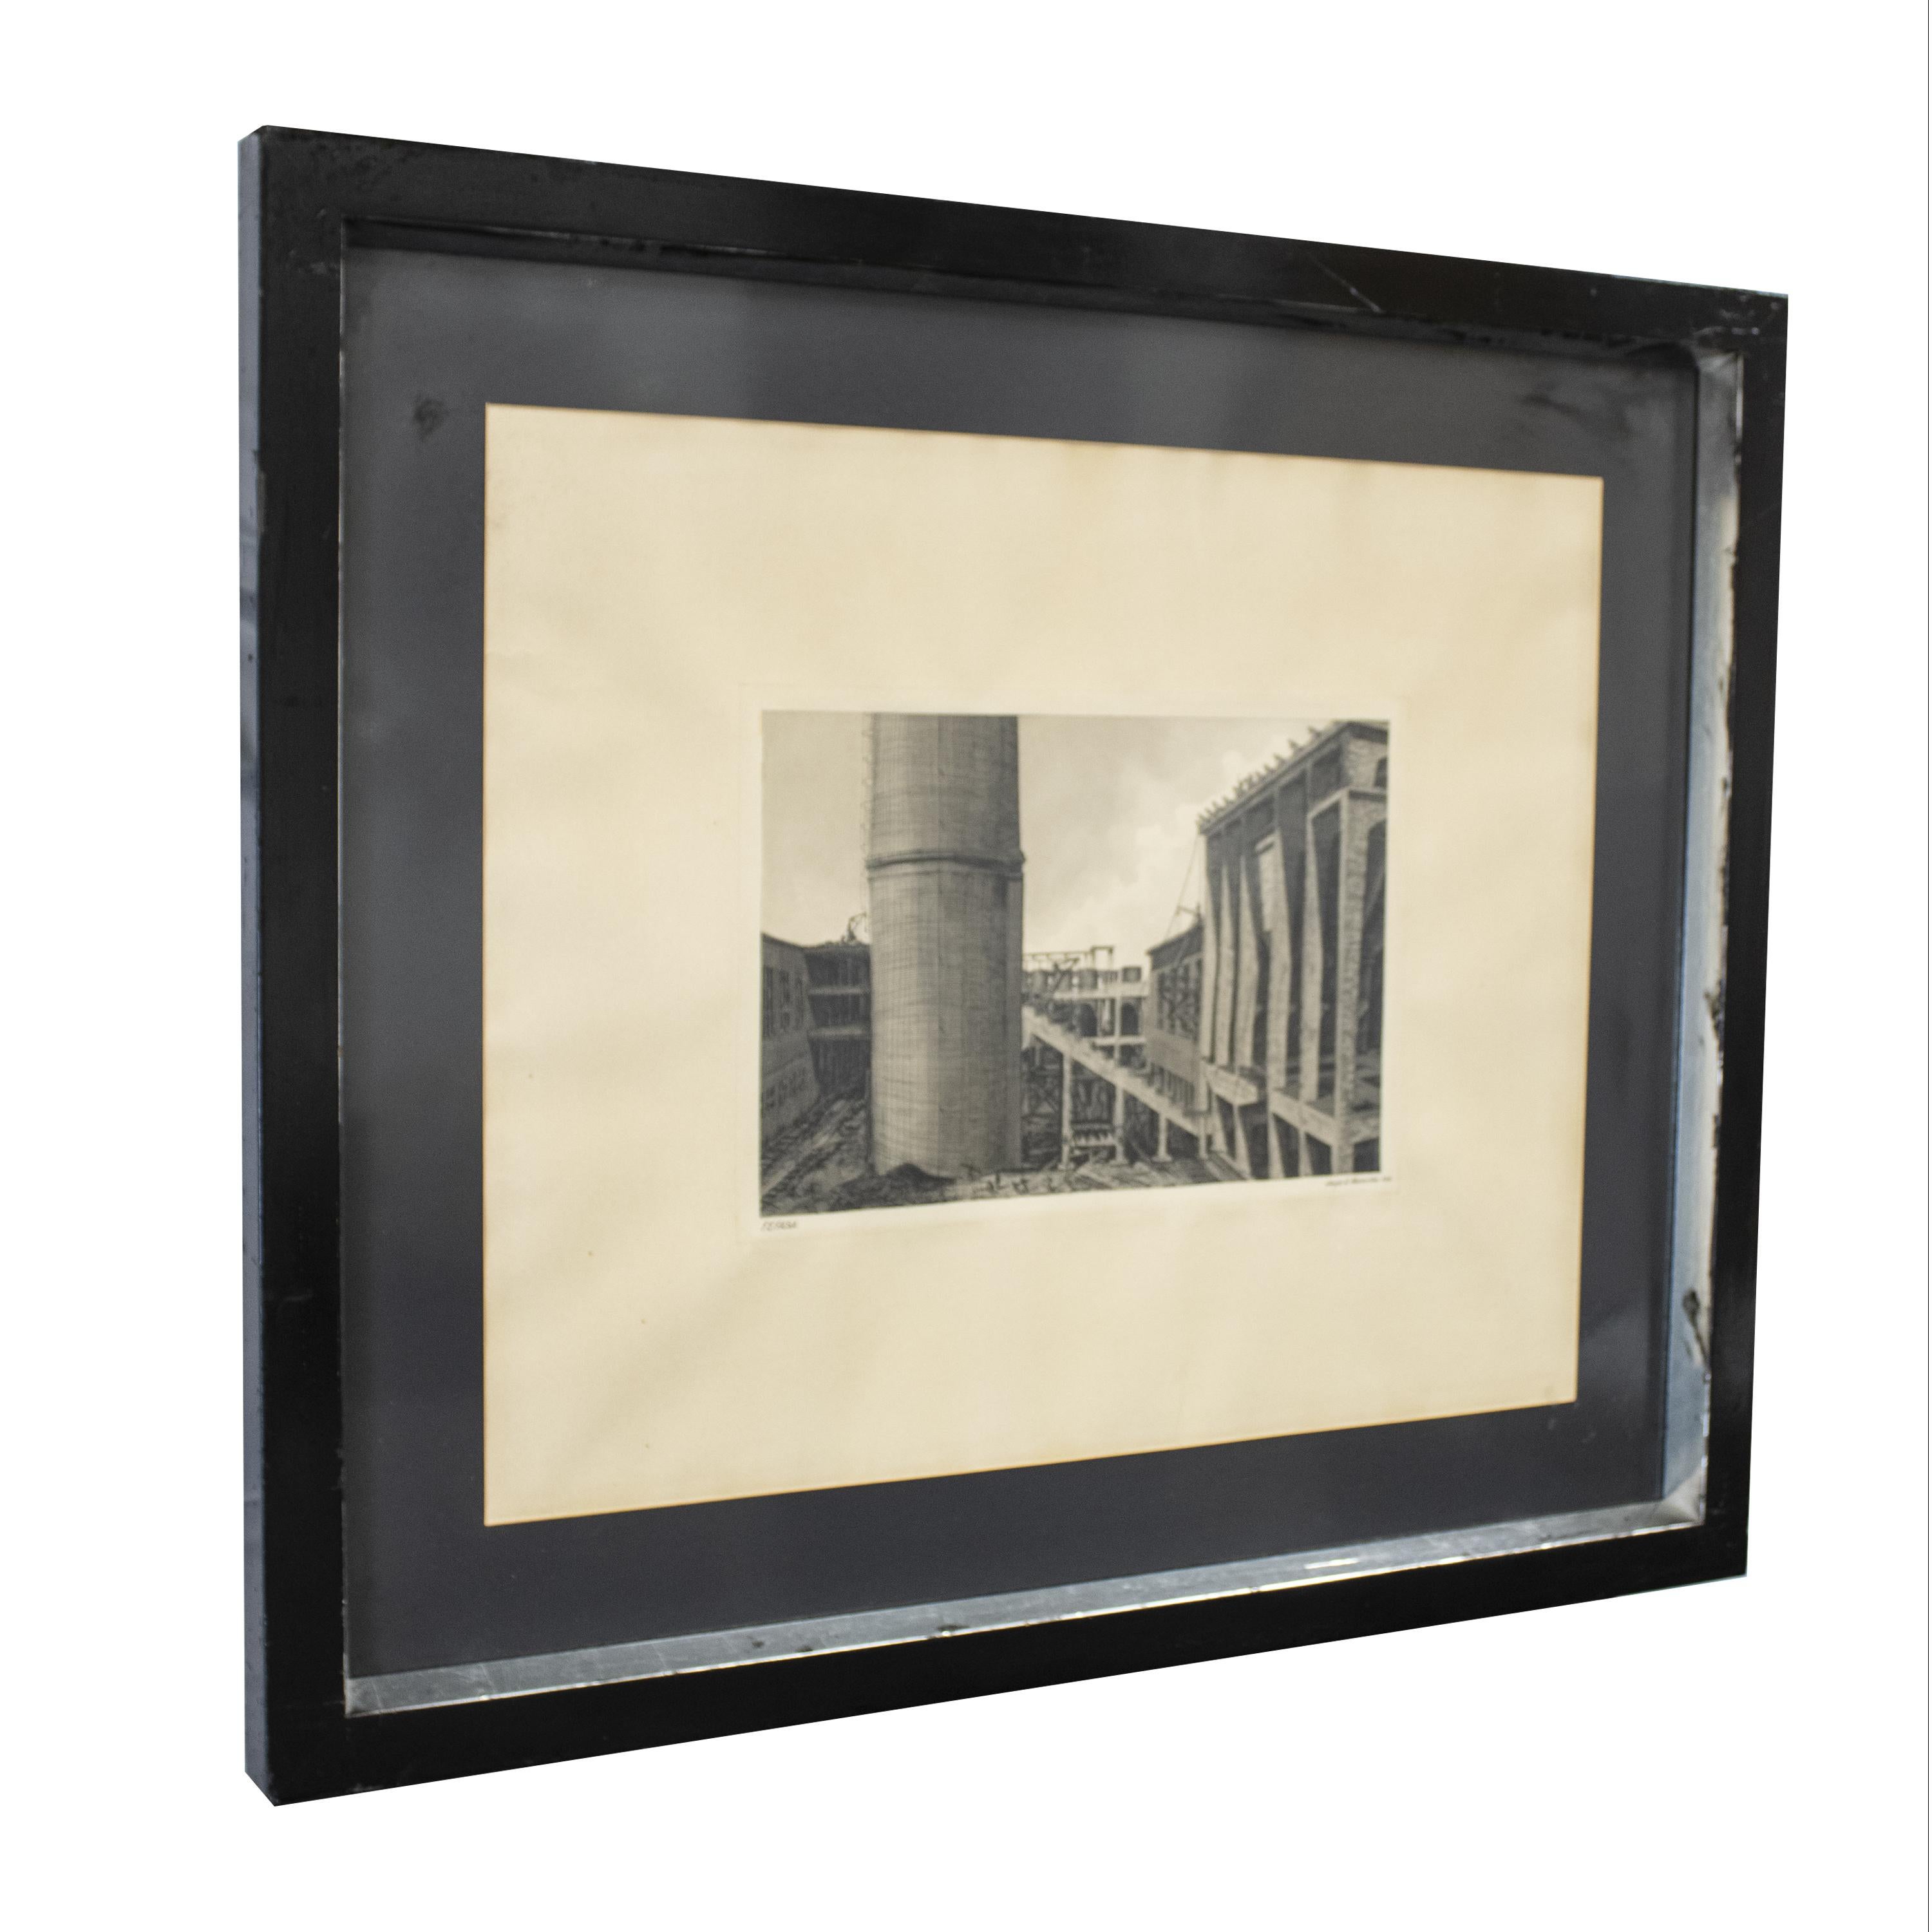 Spanish Artistic Drawing in Charcoal and Graphite by Adolfo Almarcha, Spain, 1978 For Sale